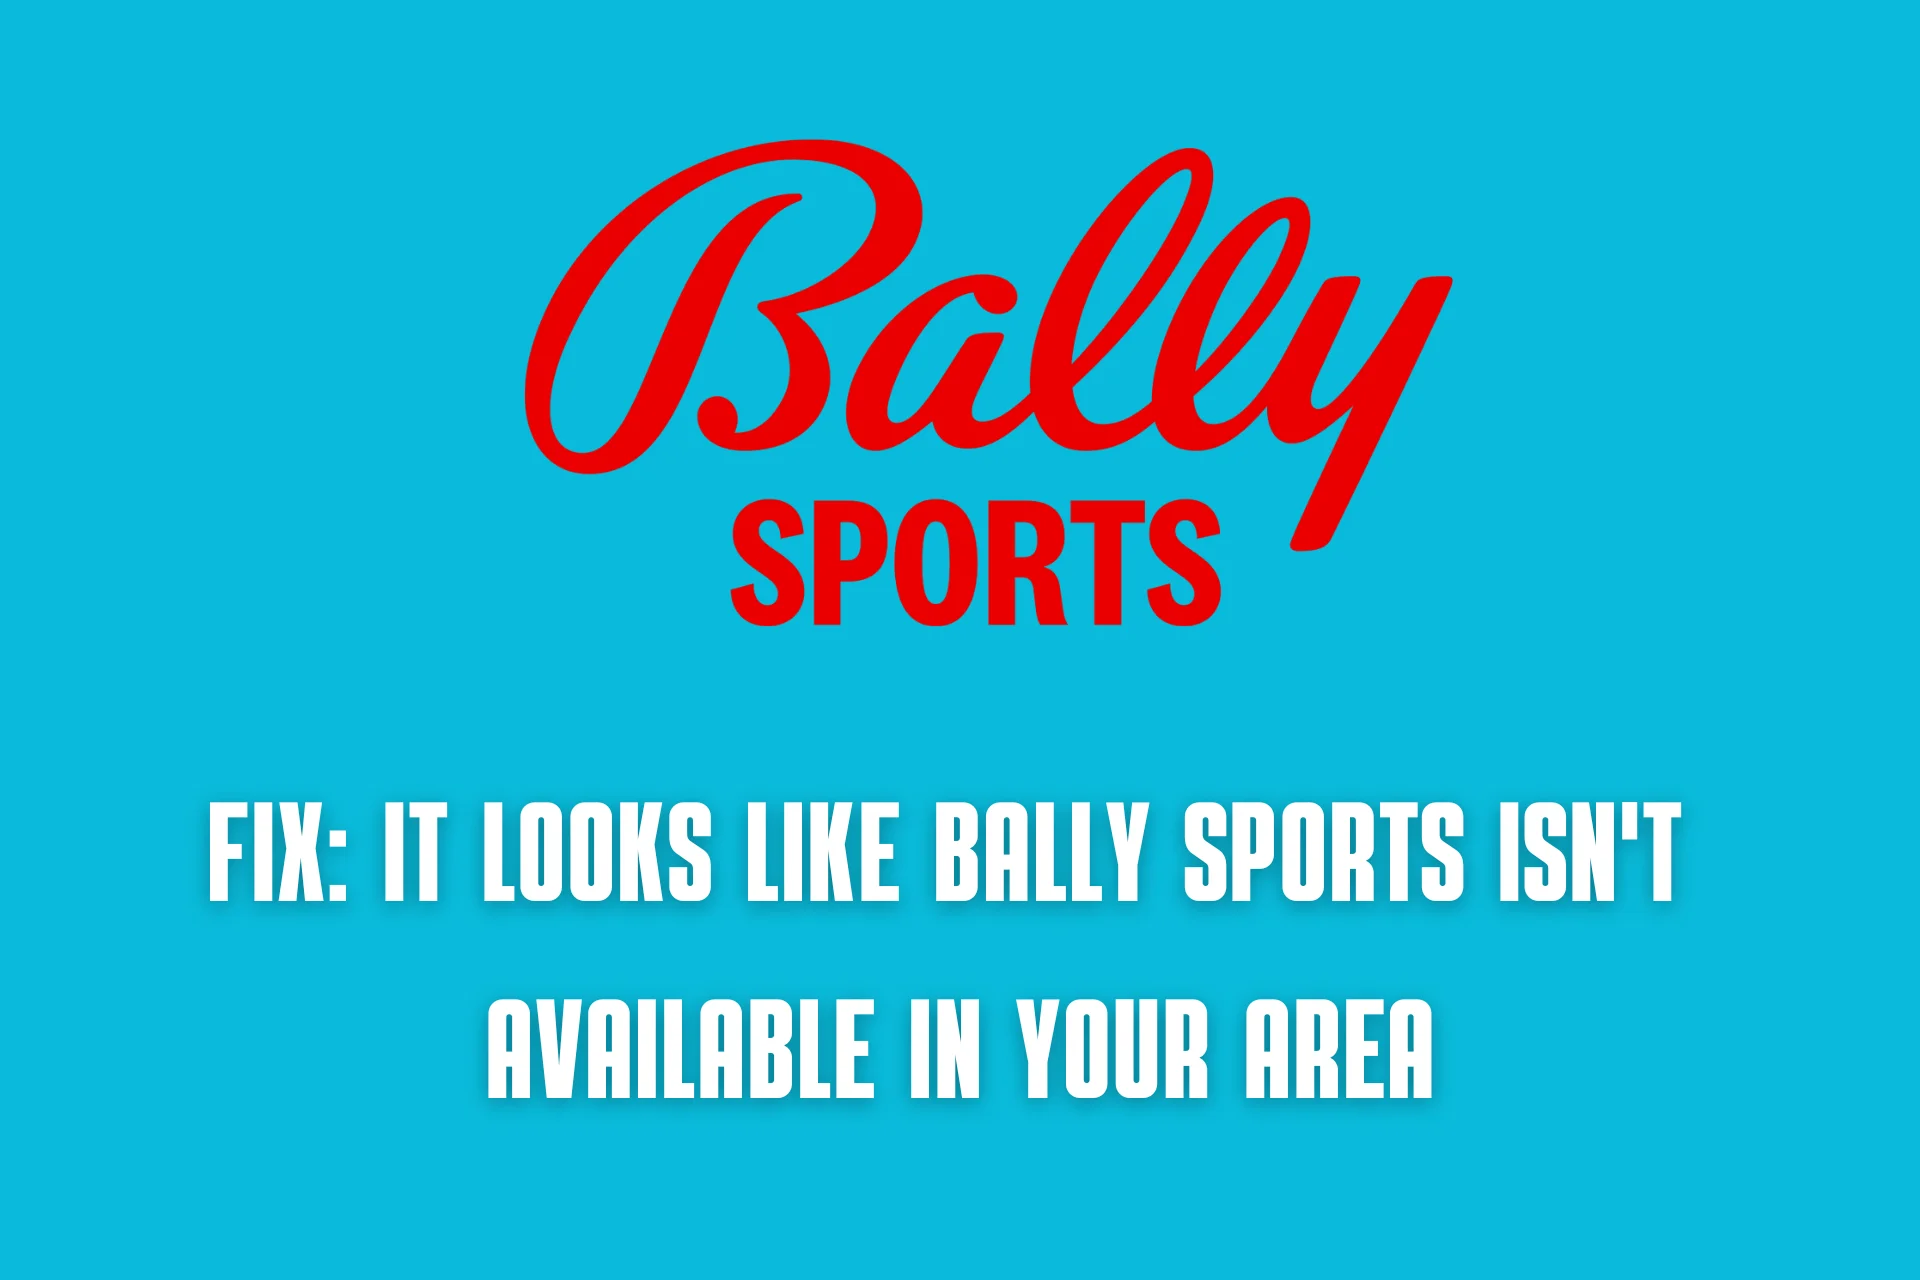 It looks like Bally Sports isn't available in your area